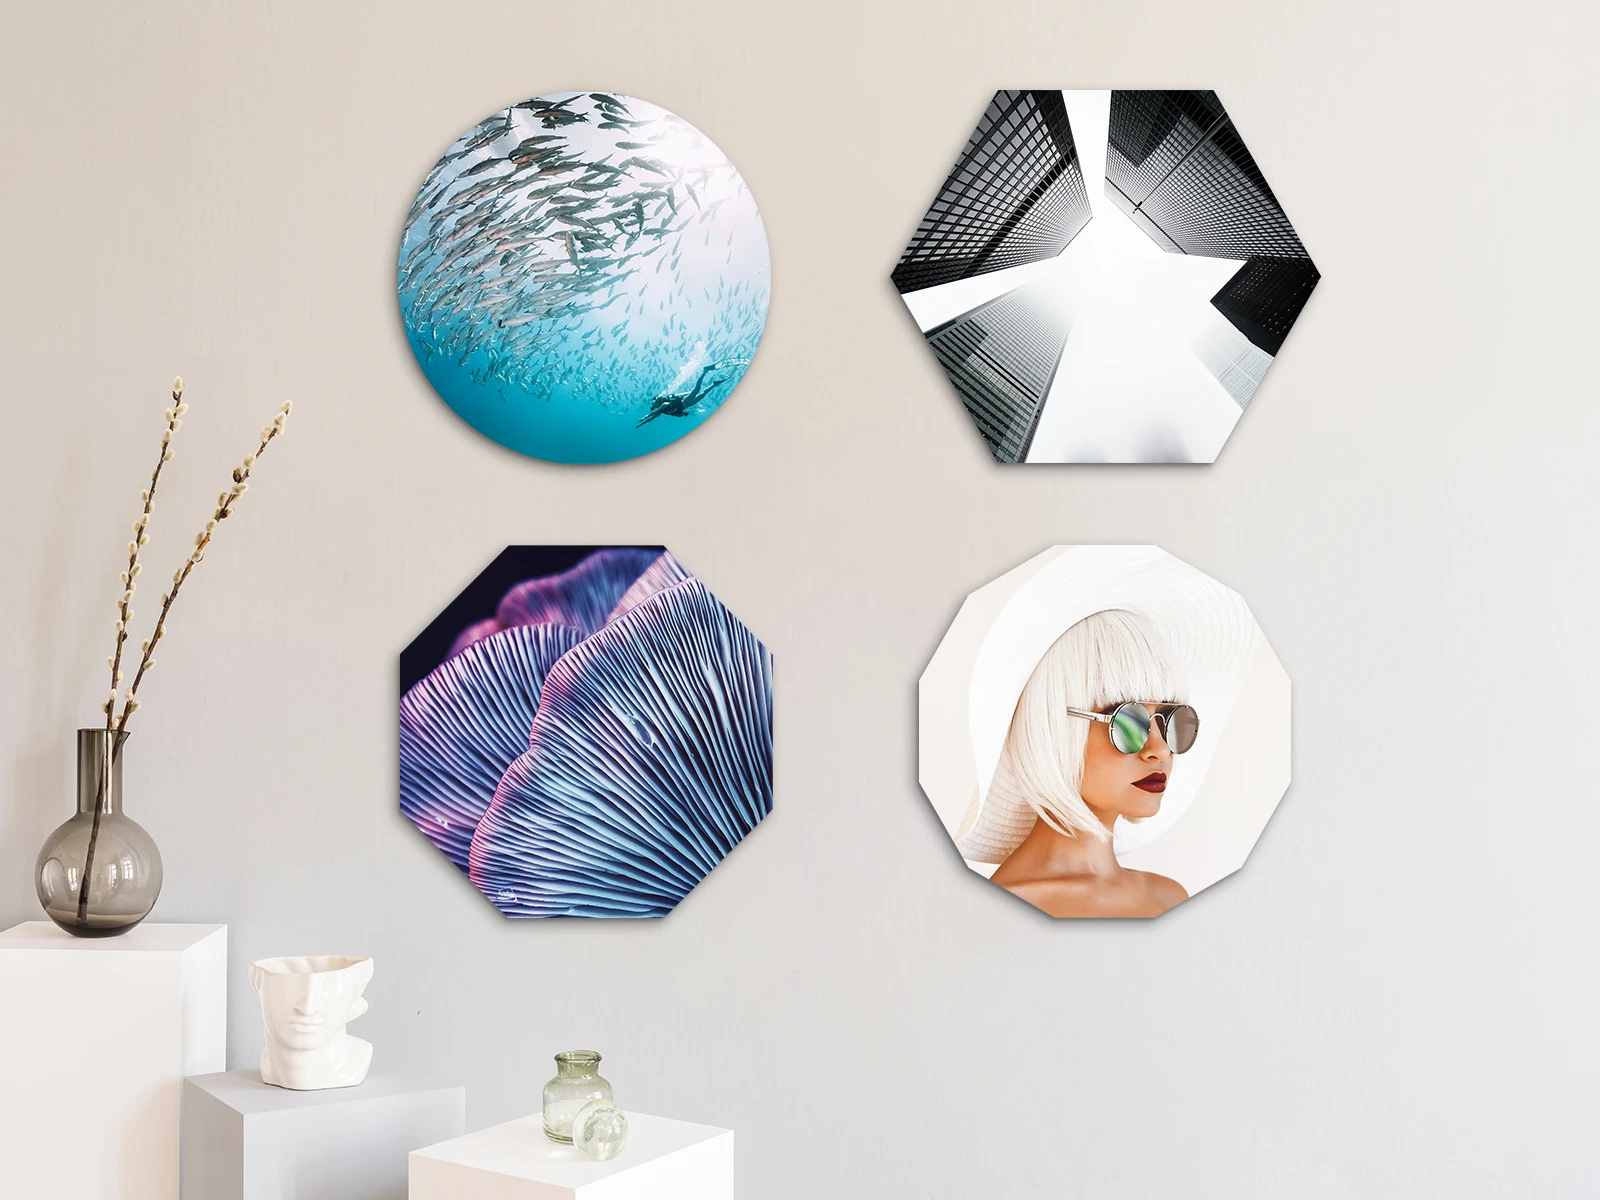 Different motifs on 4 different image formats - Round, Hexagon, Octagon and Dodecagon hanging on a wall.